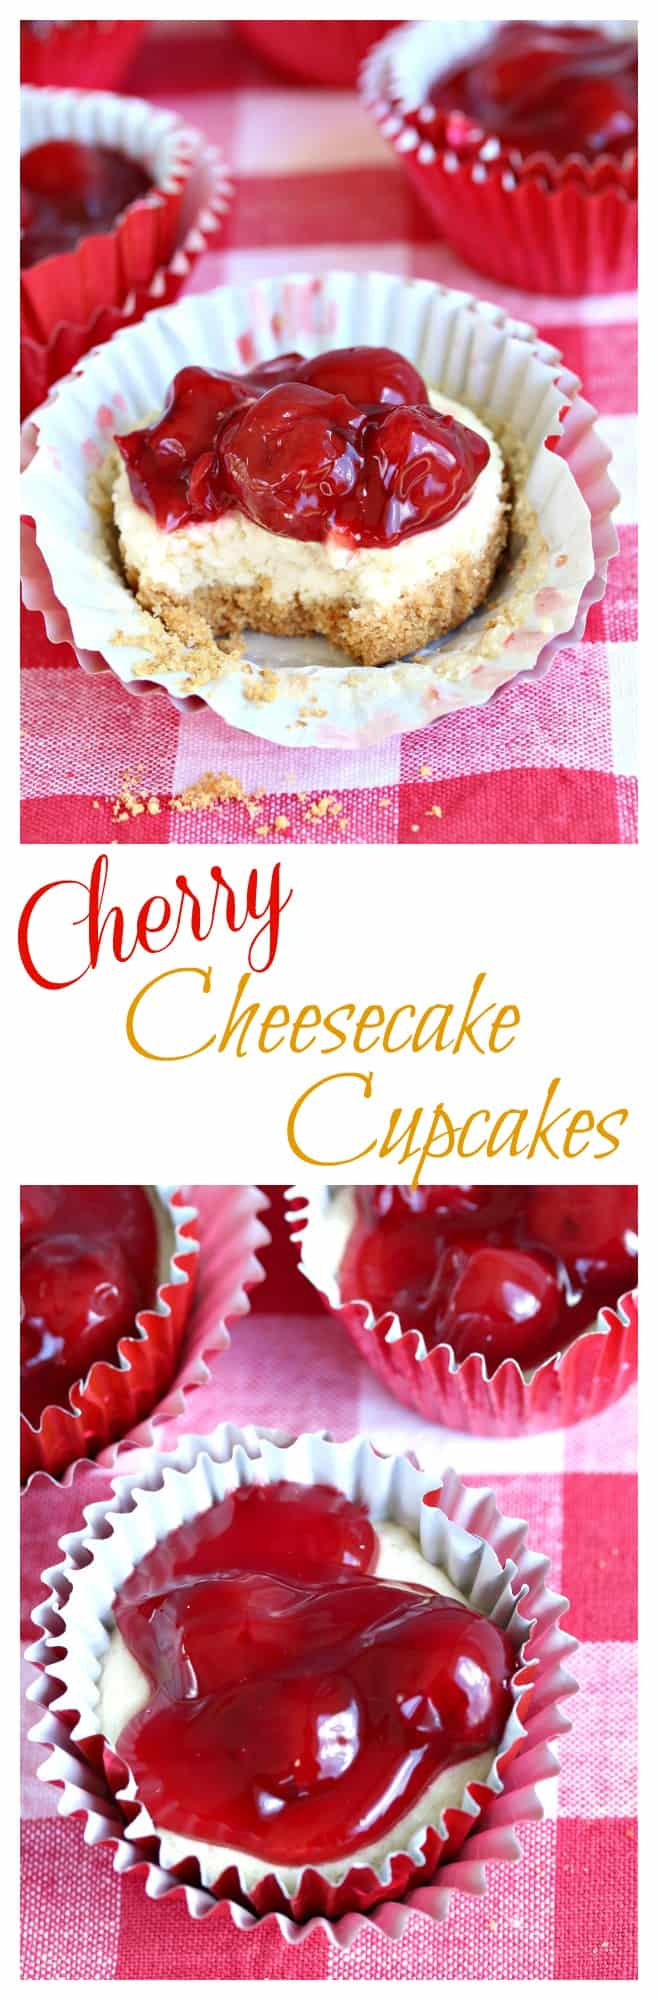 A sweet and buttery graham cracker crust topped with creamy cheesecake filling and mouth-watering cherries. | The Cozy Cook | #cupcakes #cheesecake #dessert #cherries